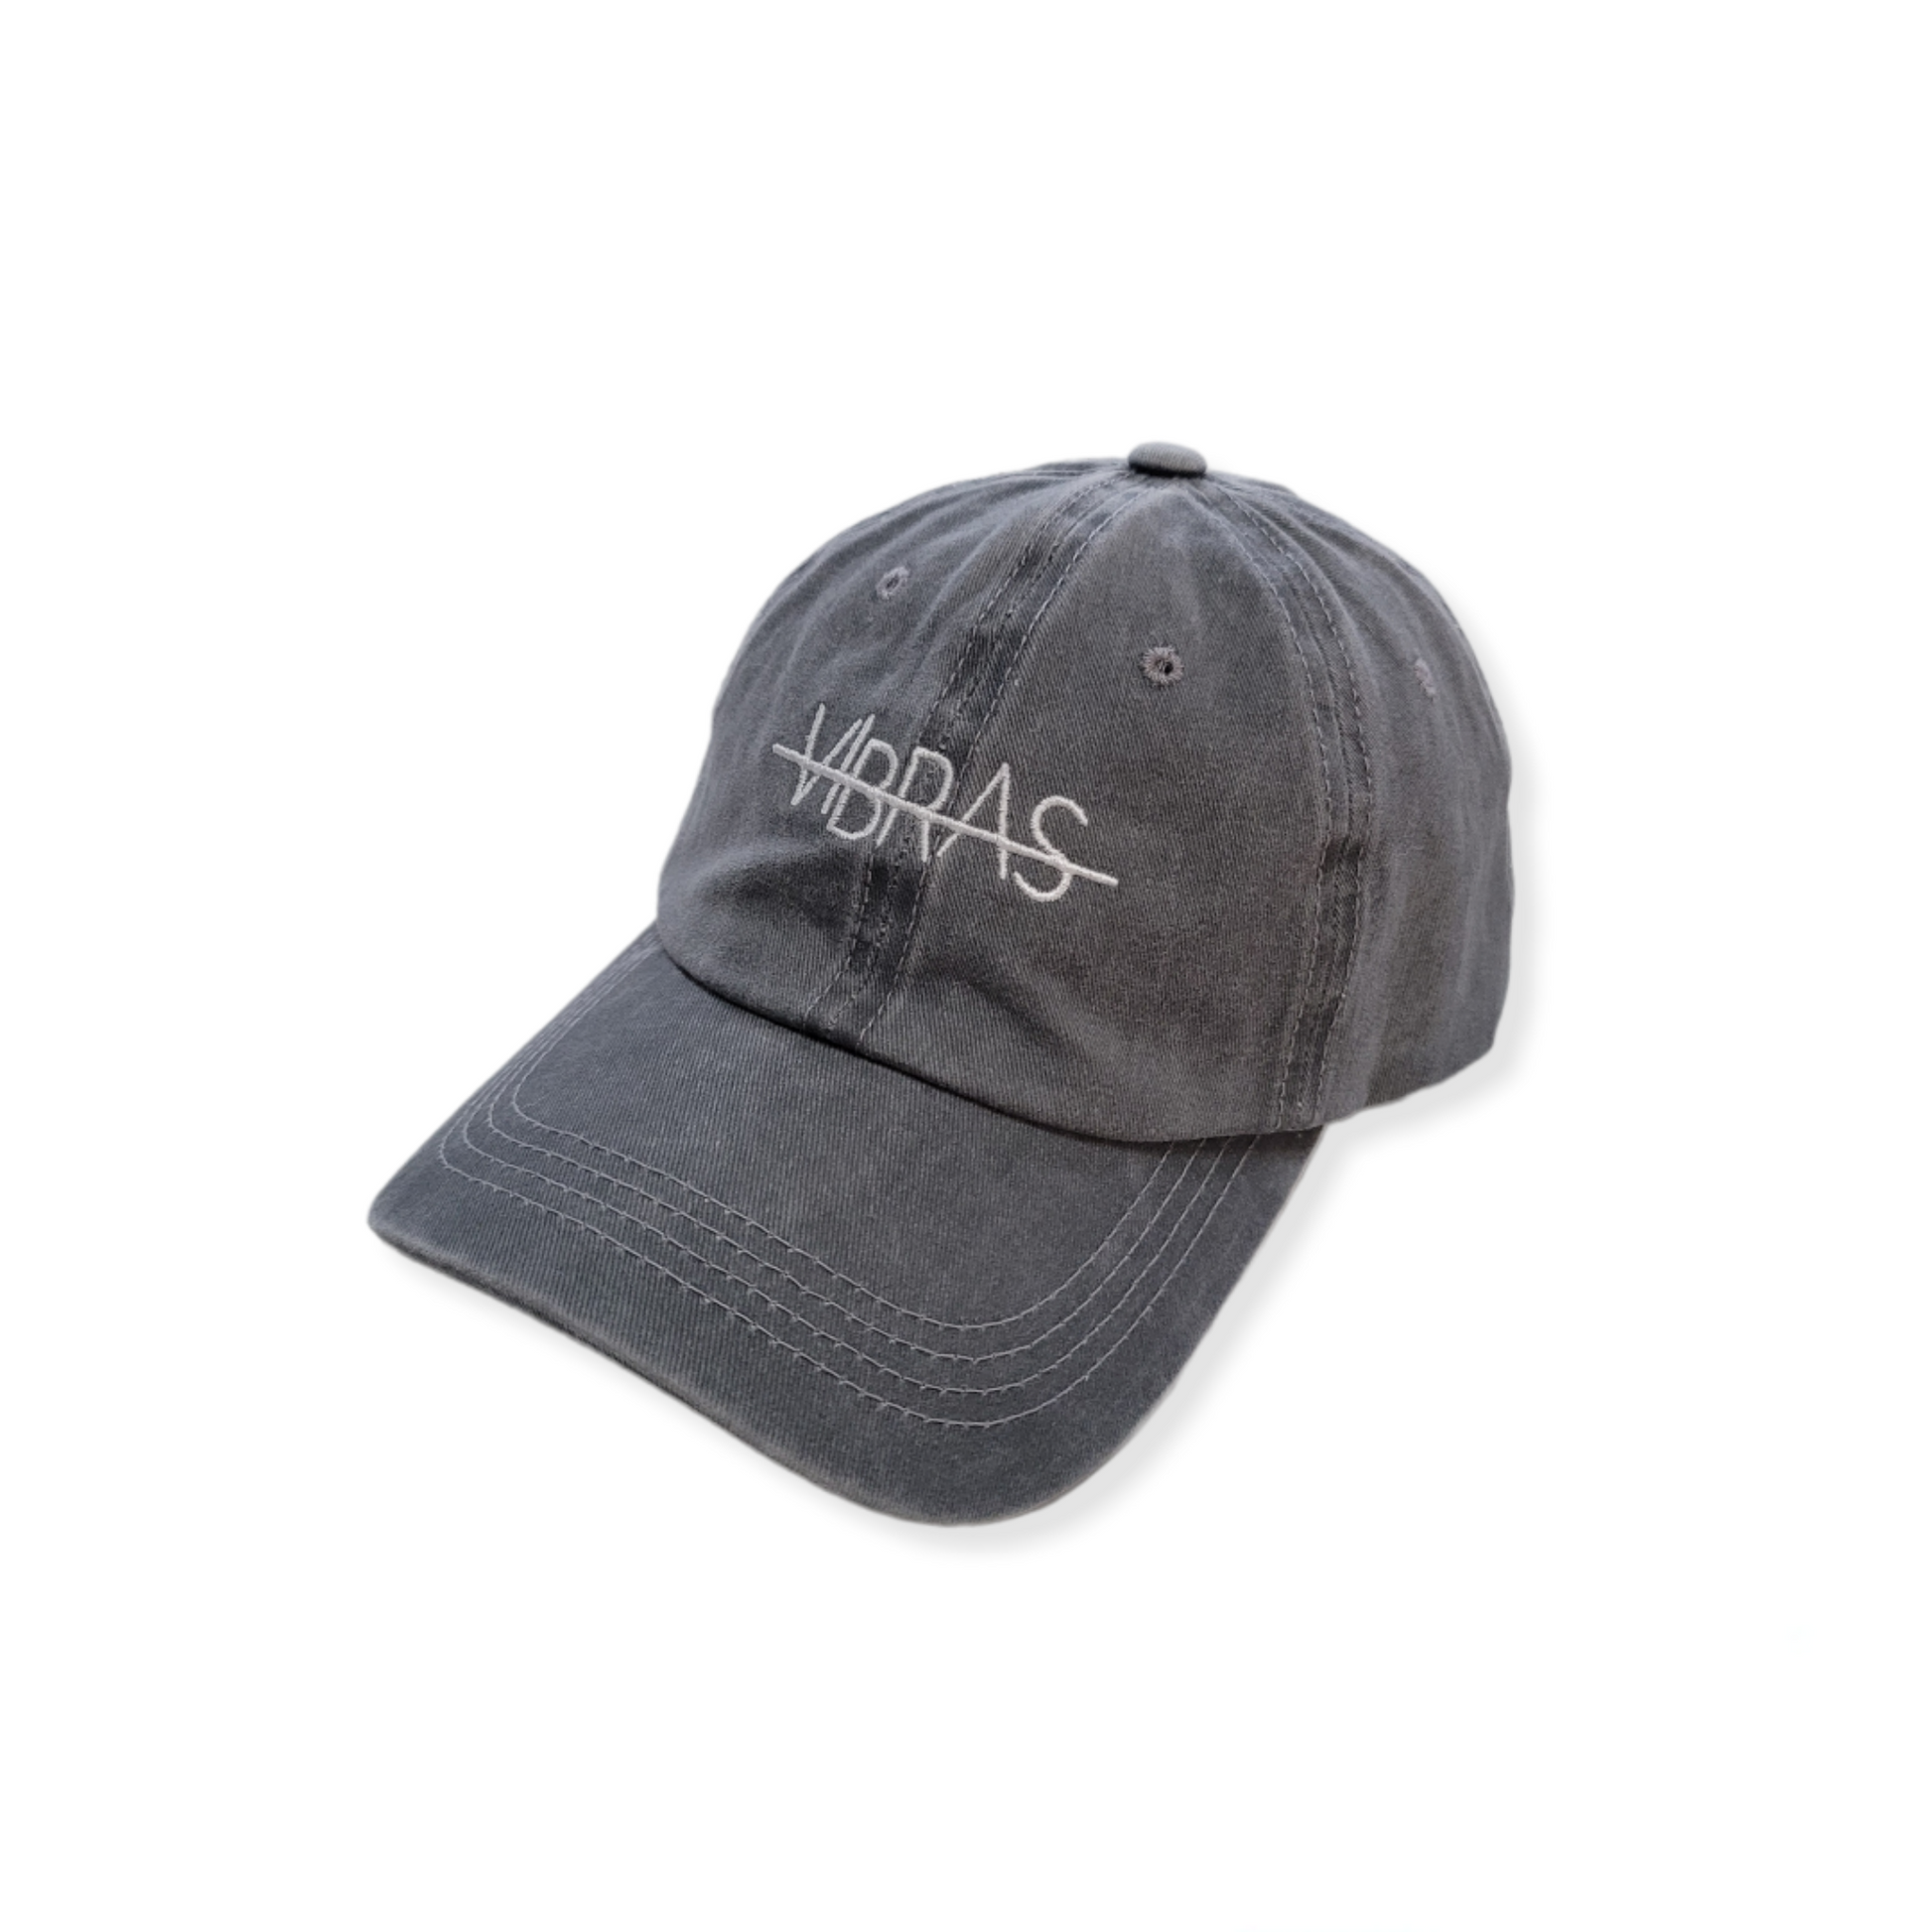 PHOTO OF AN ASH GREY BASEBALL CAP FROM VIBRAS ACTIVEWEAR ON A WHITE BACKGROUND.